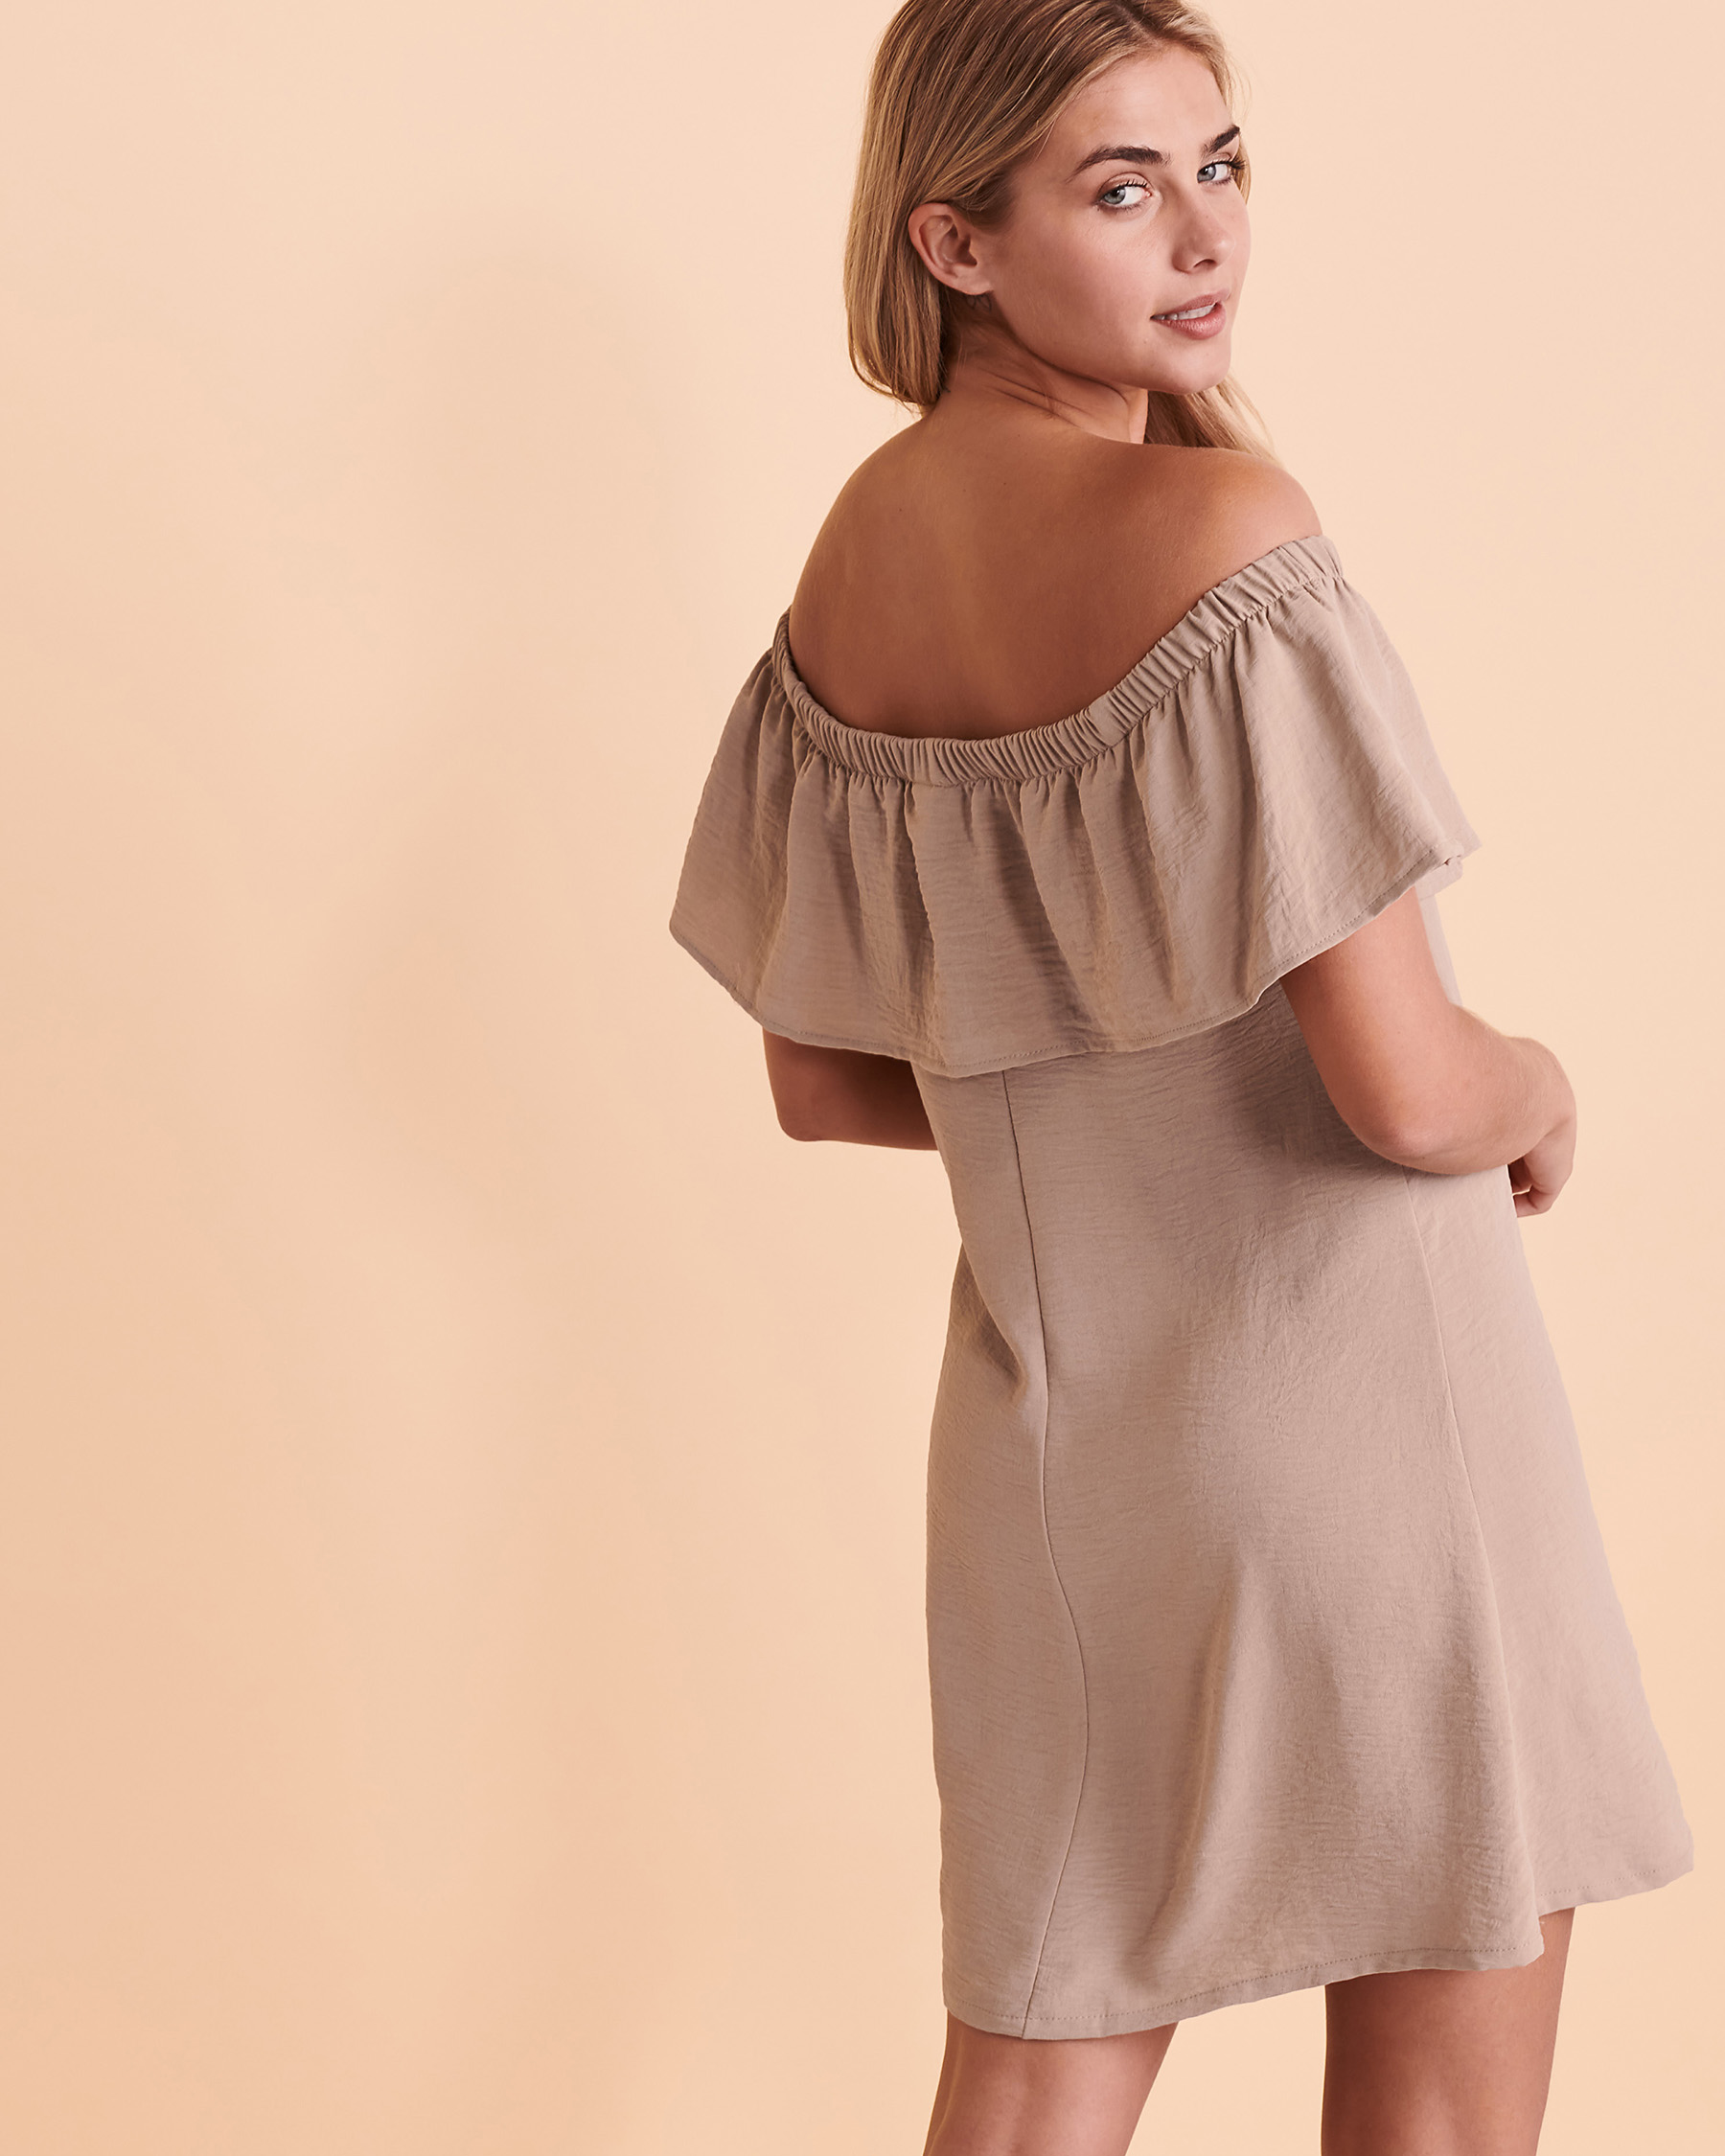 COVER ME Off the Shoulder Dress Tan 22052575 - View2